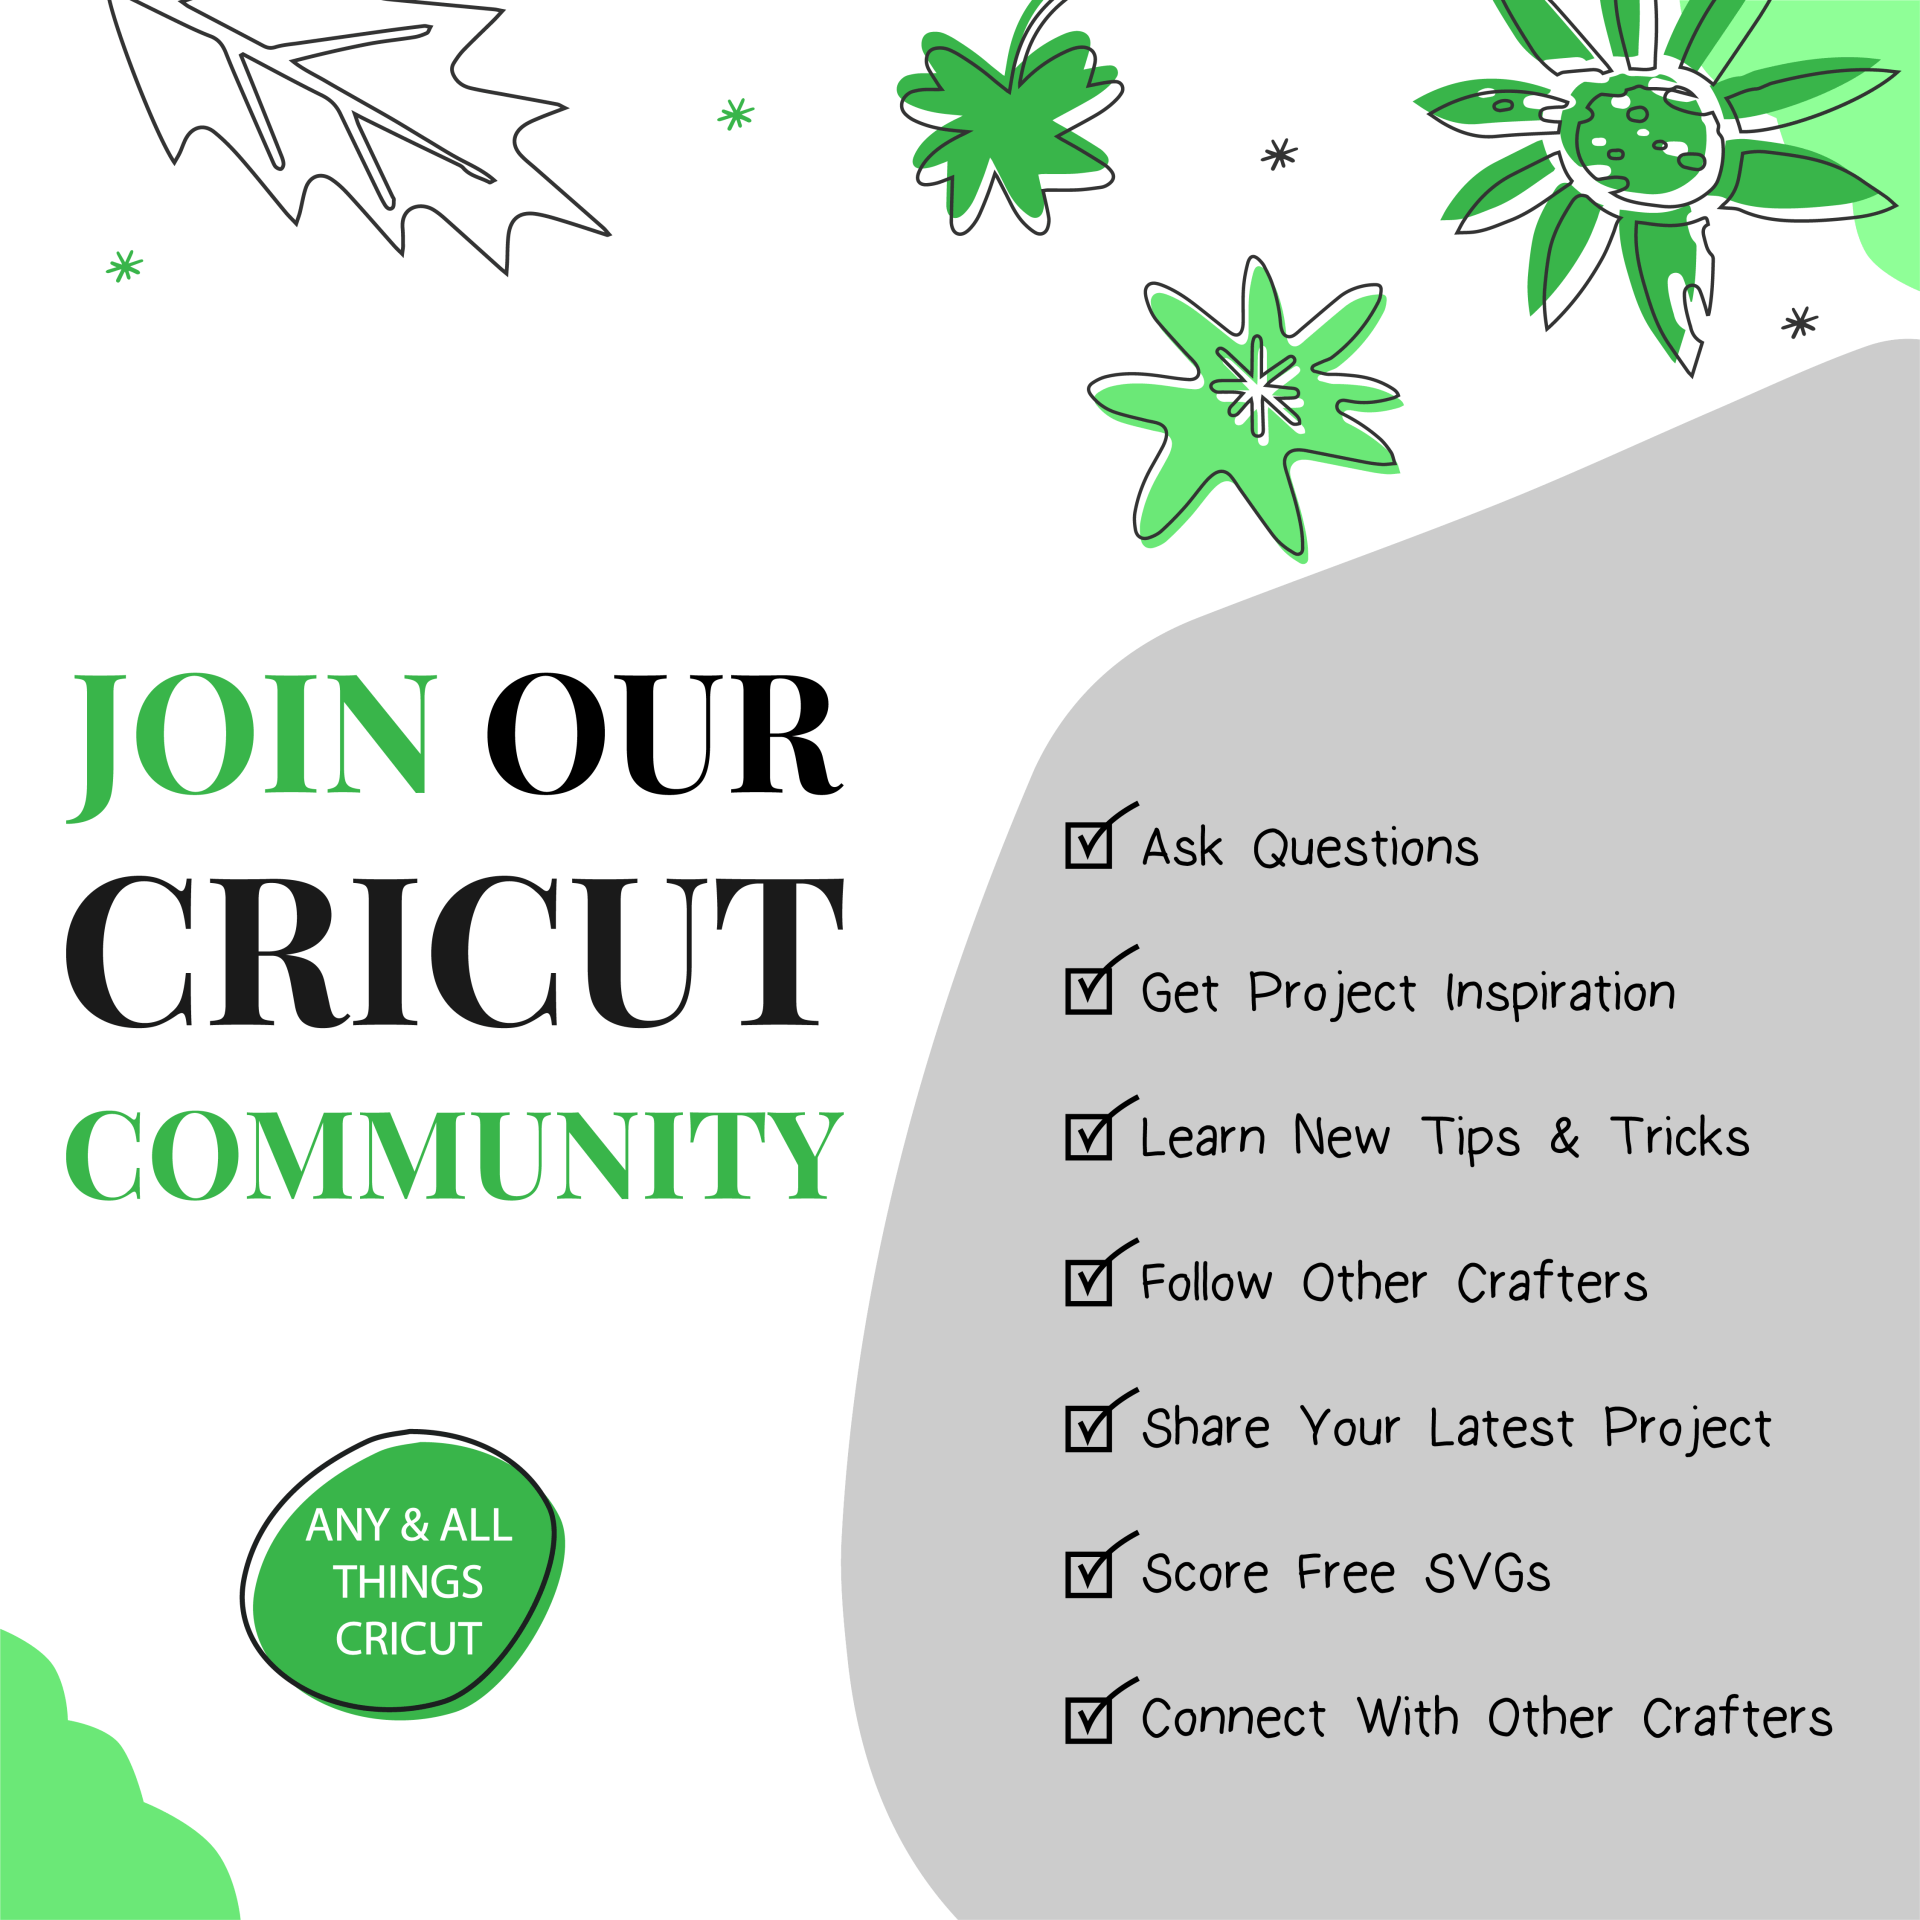 join our cricut community signup